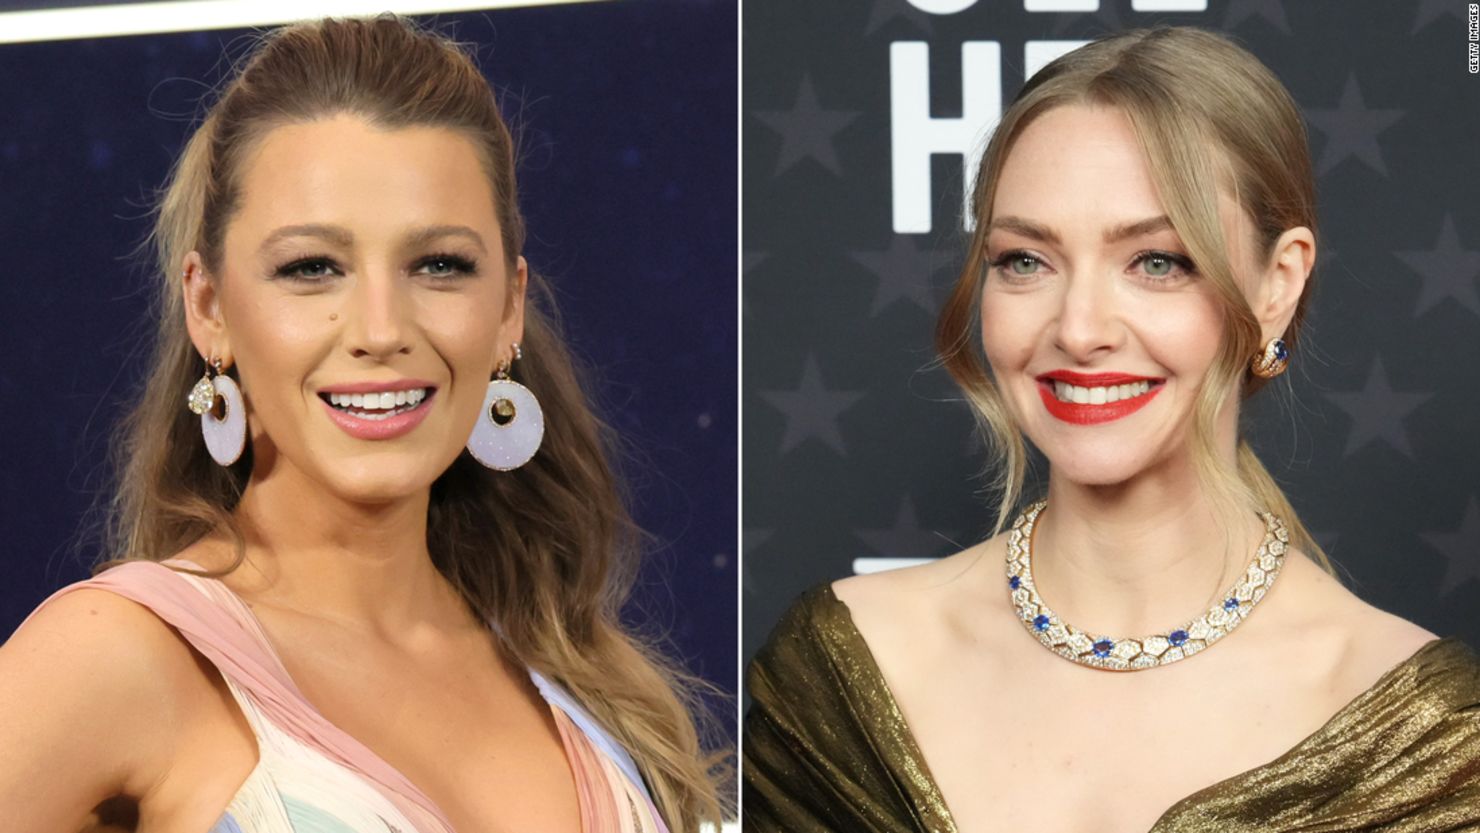 Amanda Seyfried revealed that Blake Lively had auditioned for her role in "Mean Girls."